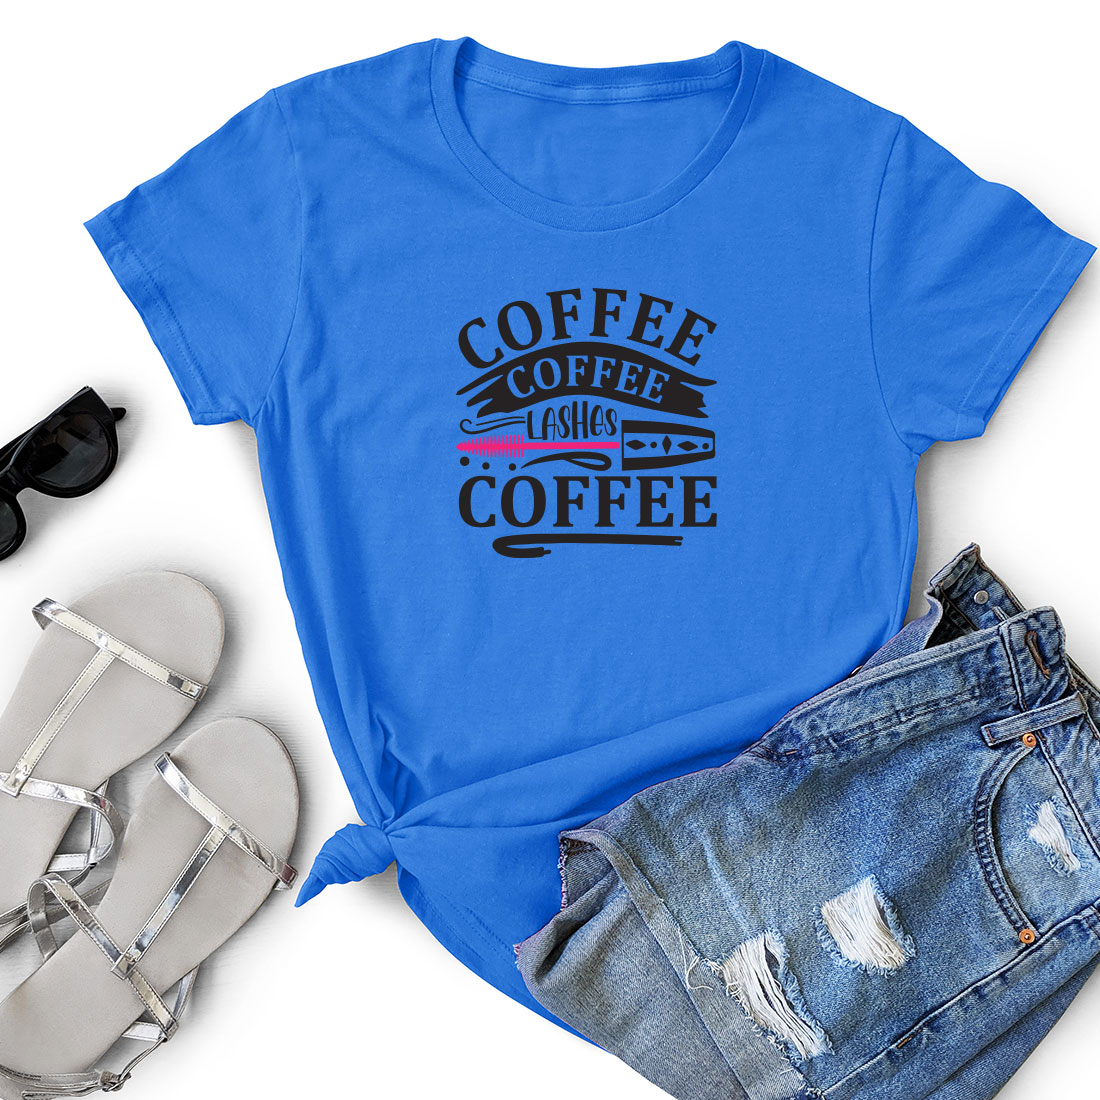 T - shirt that says coffee and a pair of shorts.